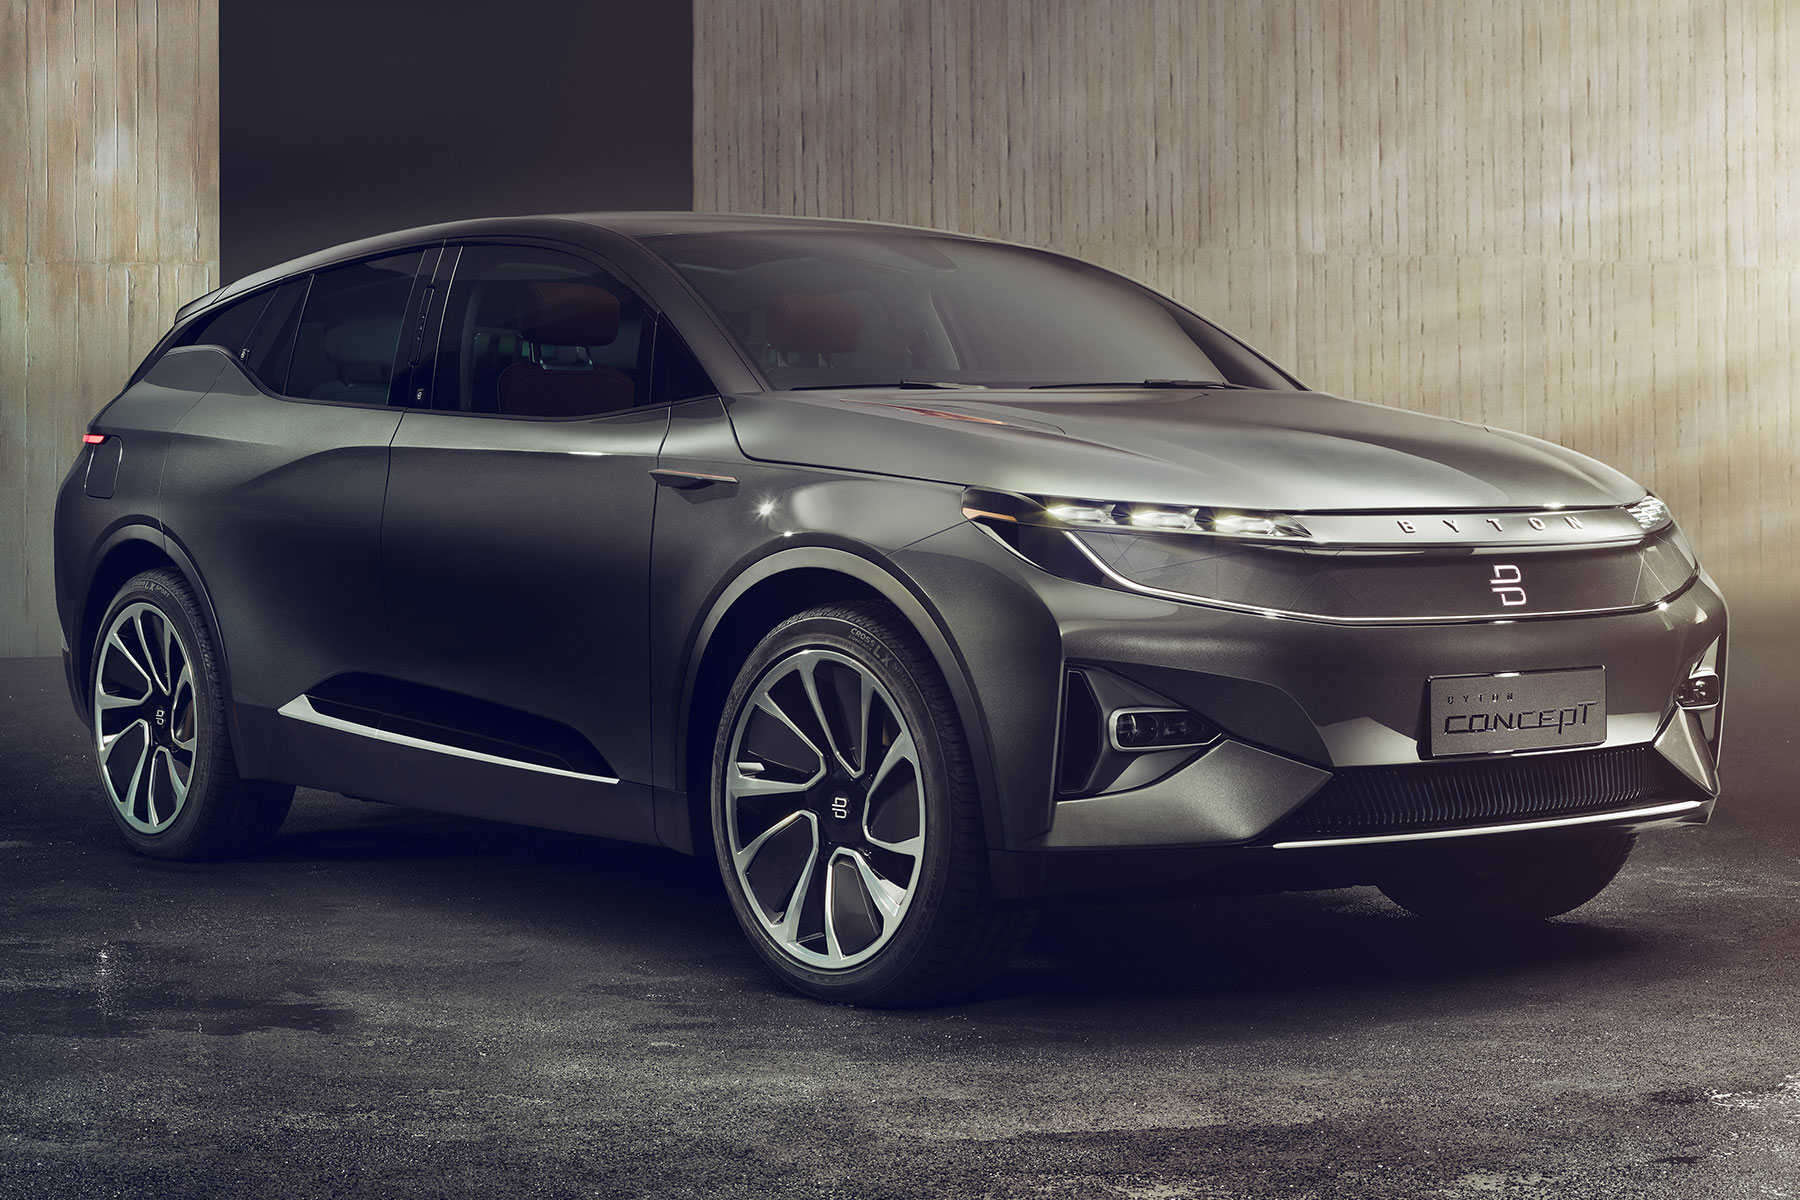 New Byton electric crossover set to take on Tesla